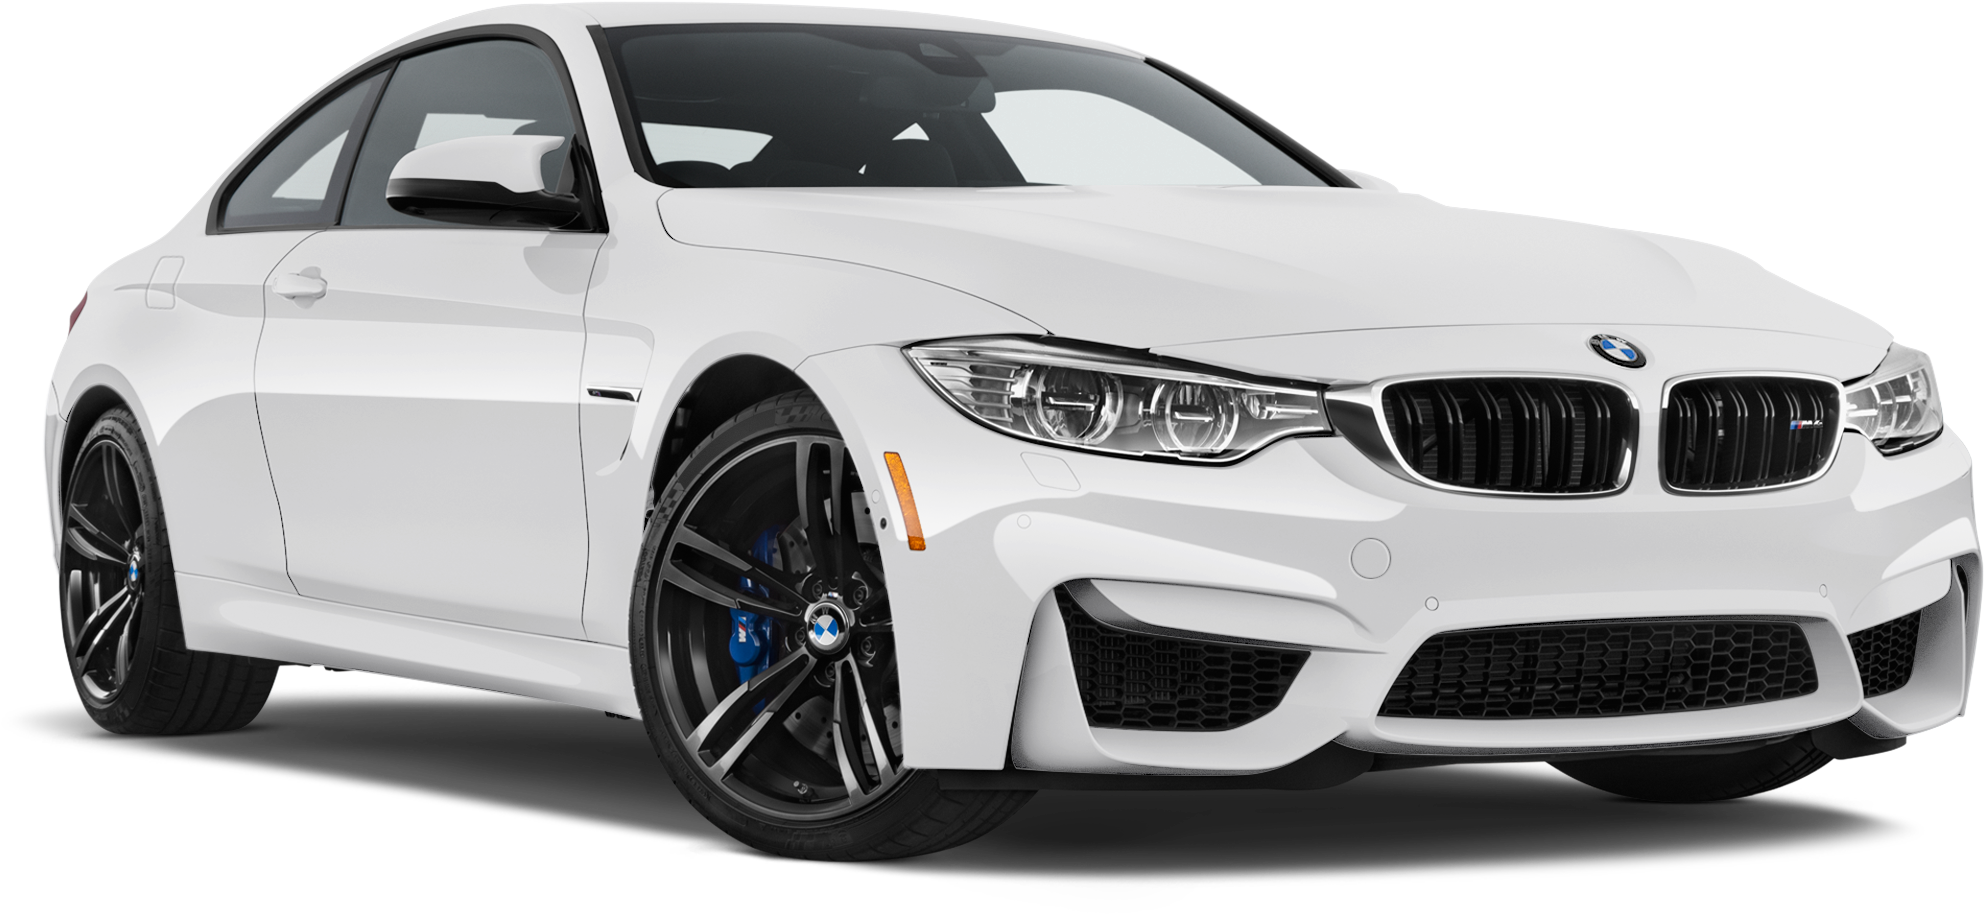 Bmw M4 Prices And Specifications Bmw 8 Series